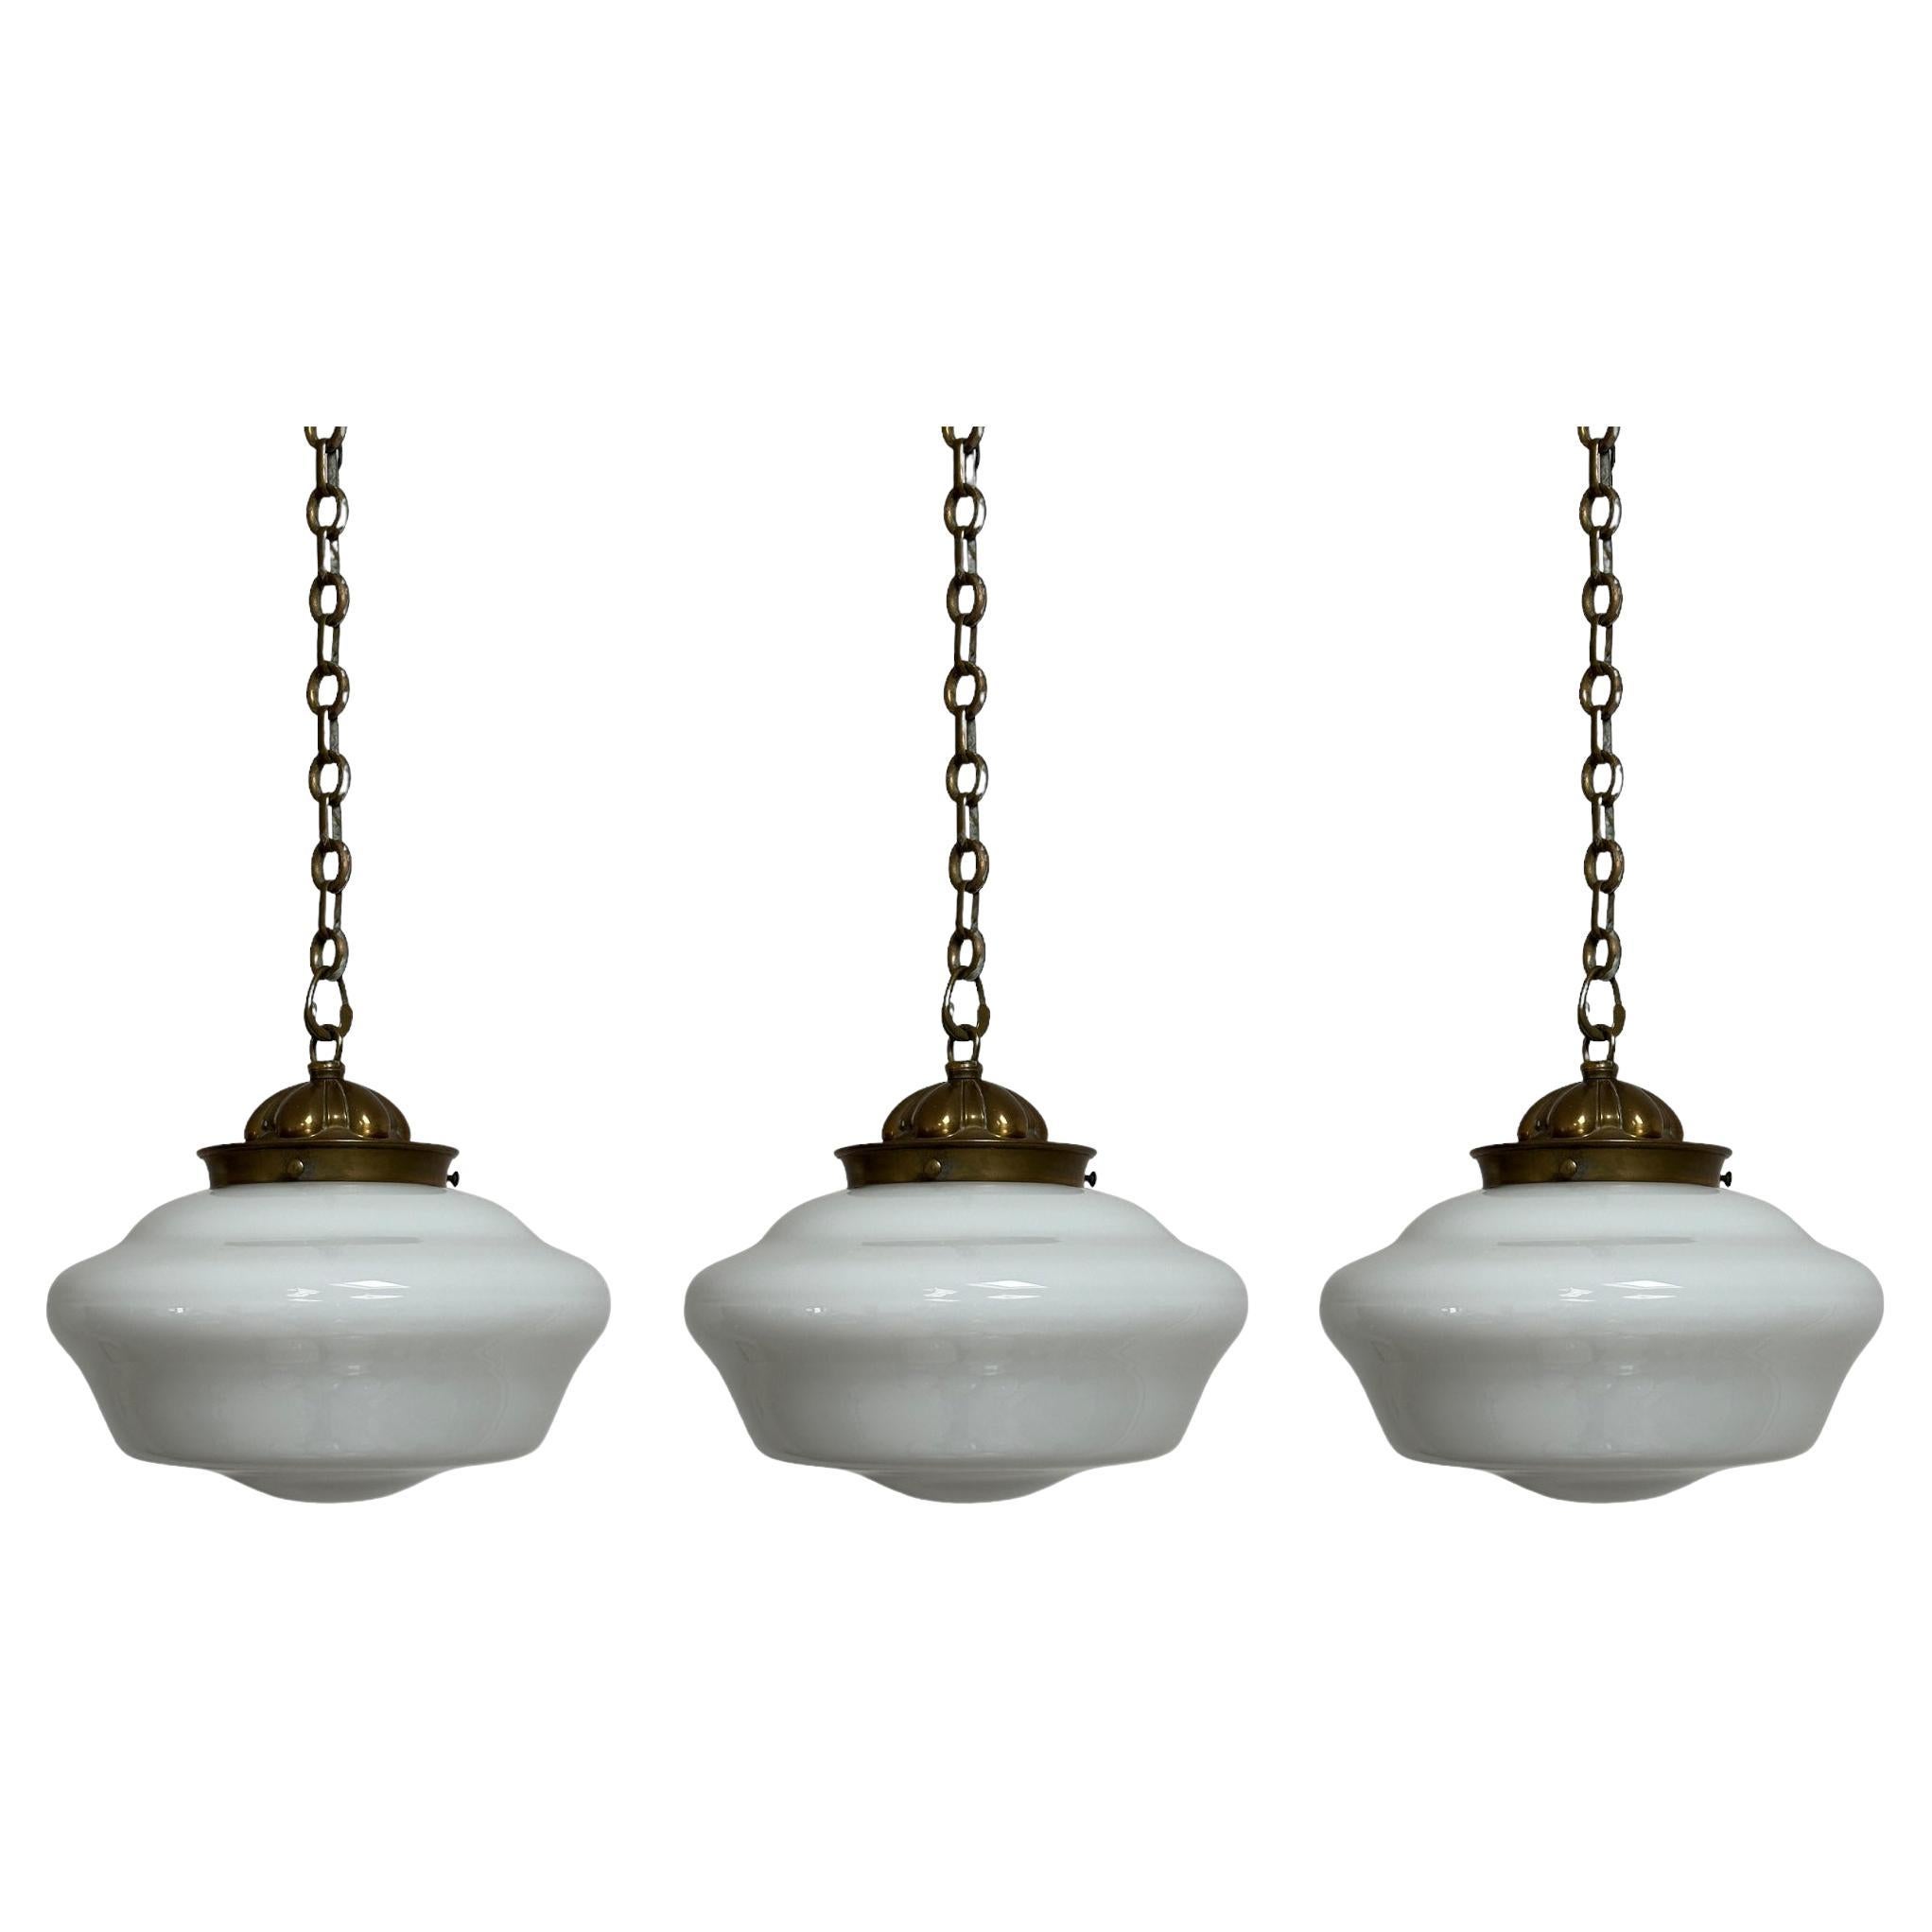 - A rare and impressive run of 'Hailware' opaline brass ceiling pendants by Hailwood & Ackroyd, England circa 1930. 
- This large run of milk glass pendant lights originally hung inside an old Cambridge University in England and are in a wonderful